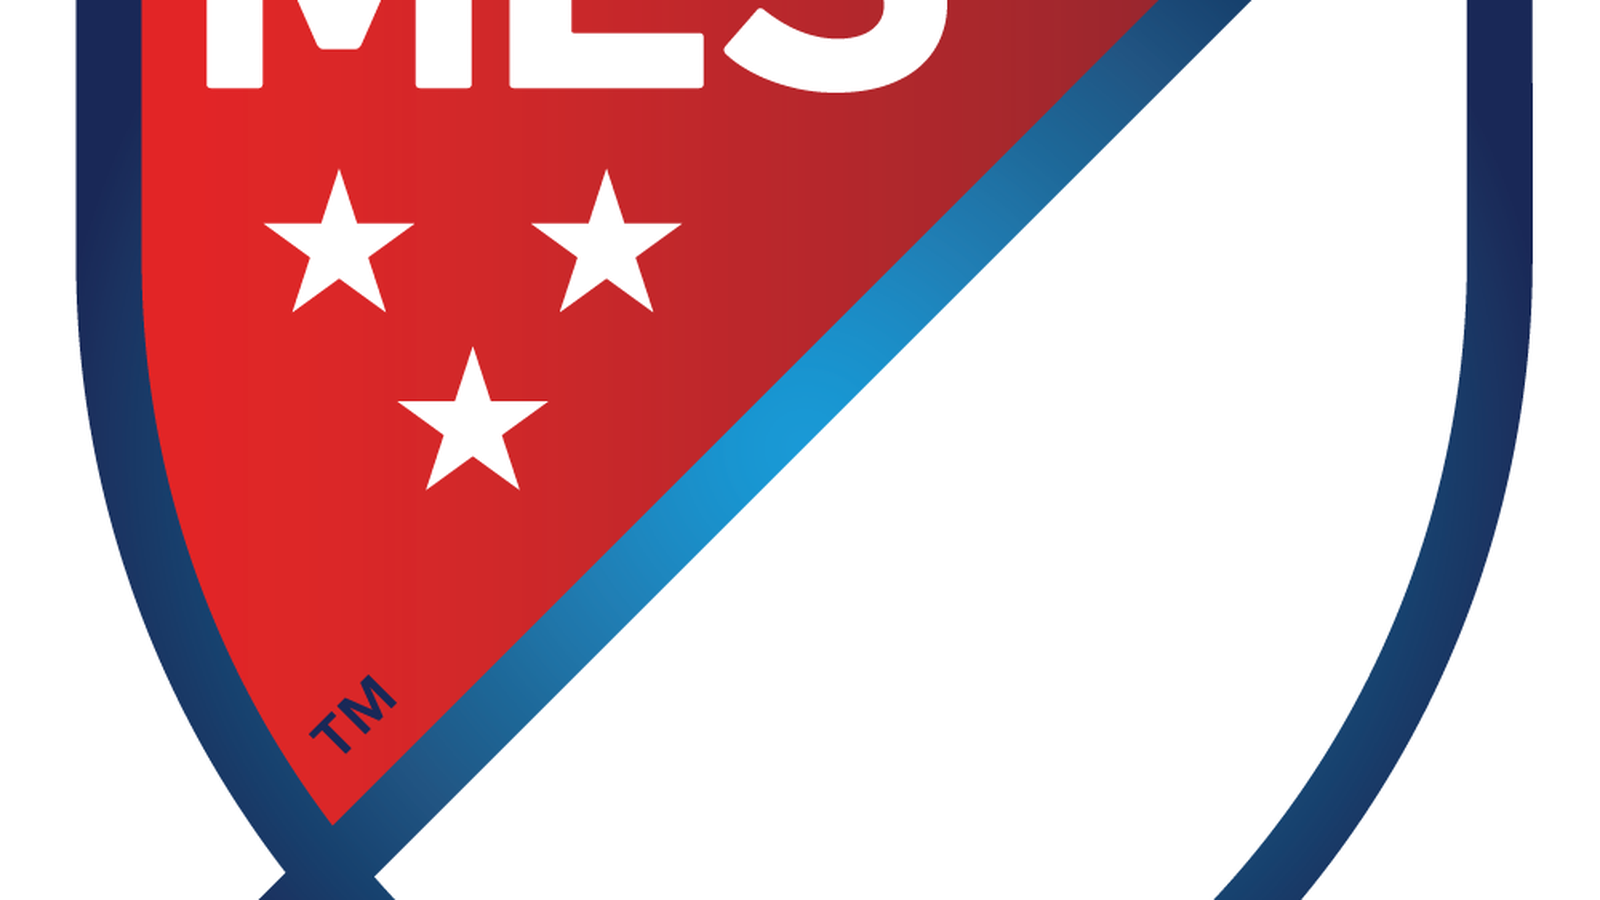 MLS Next: The new MLS logo has arrived - LAG Confidential